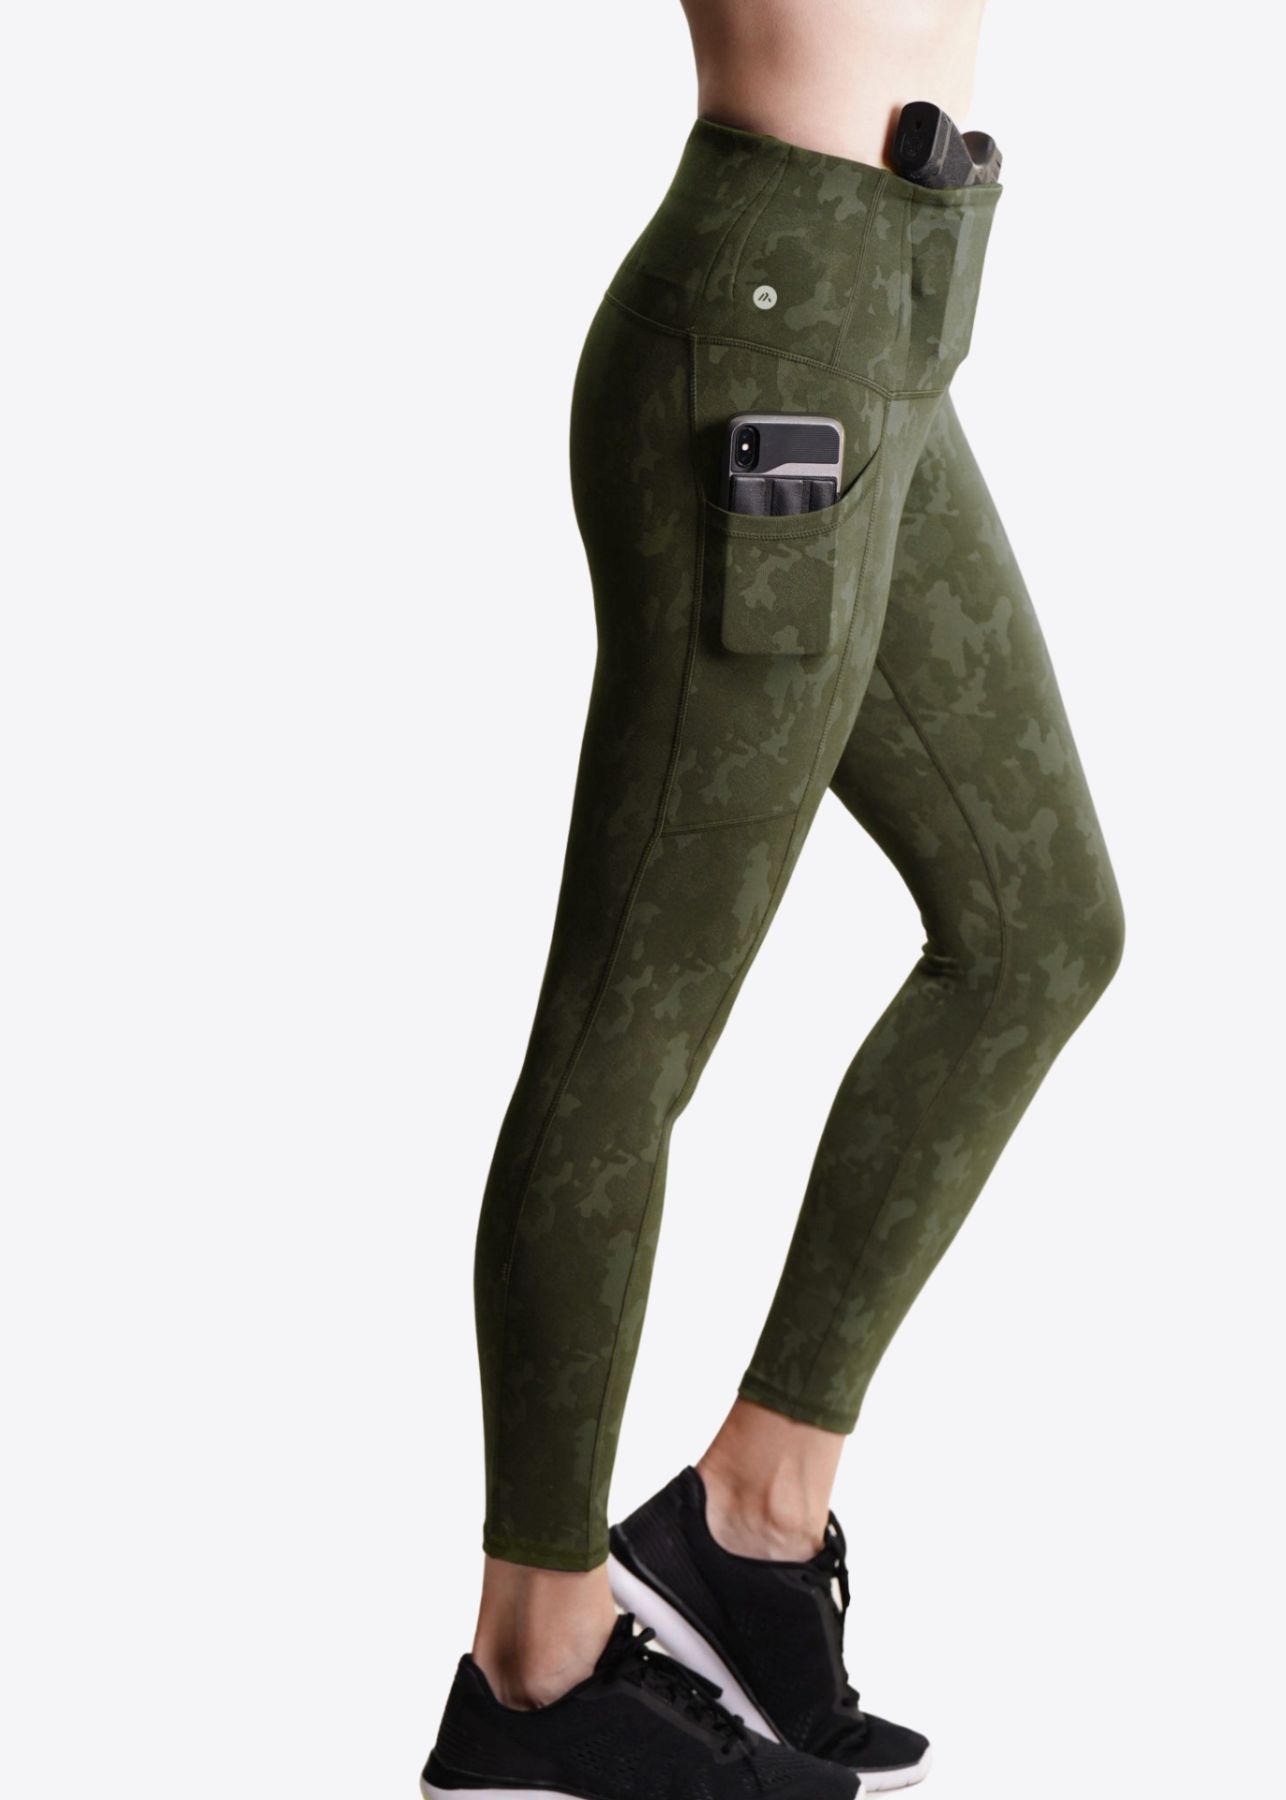 Concealed Carry Leggings Wholesale  International Society of Precision  Agriculture